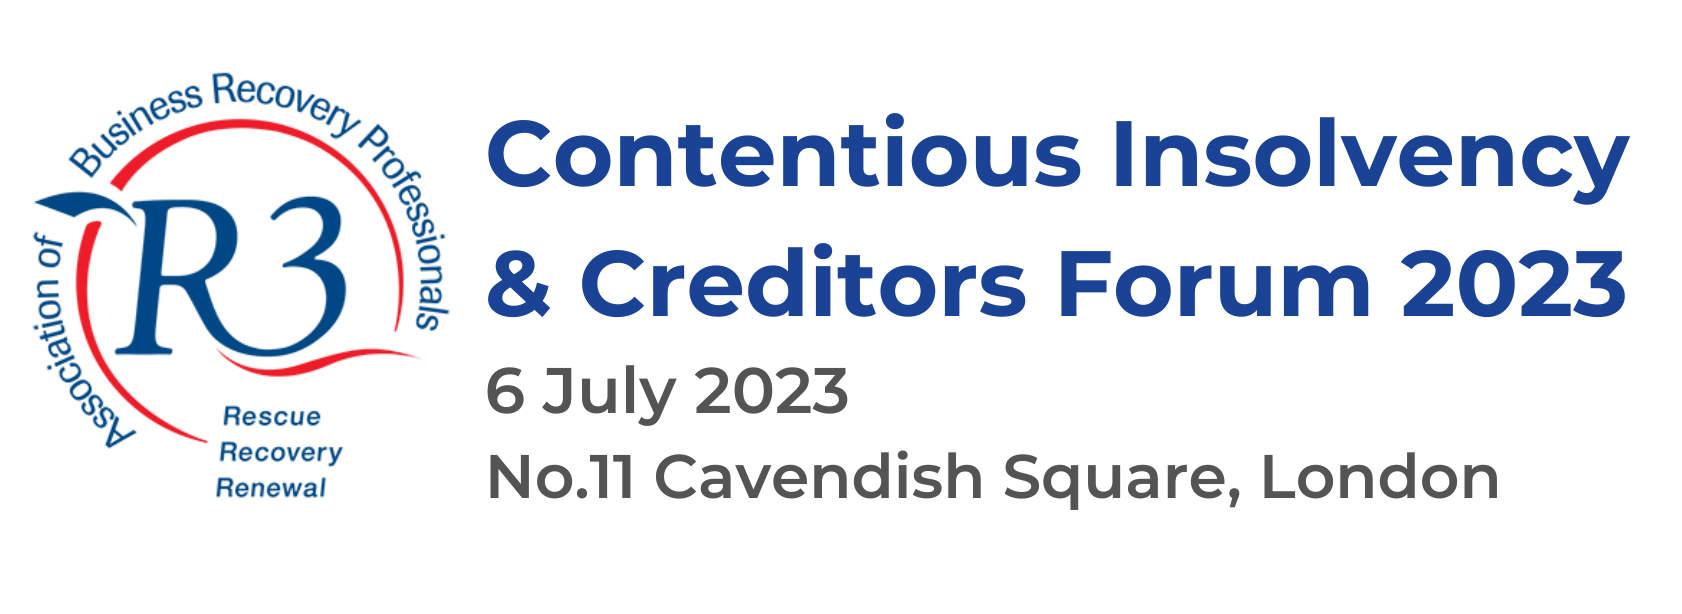 Contentious Insolvency and Creditors Forum 2023